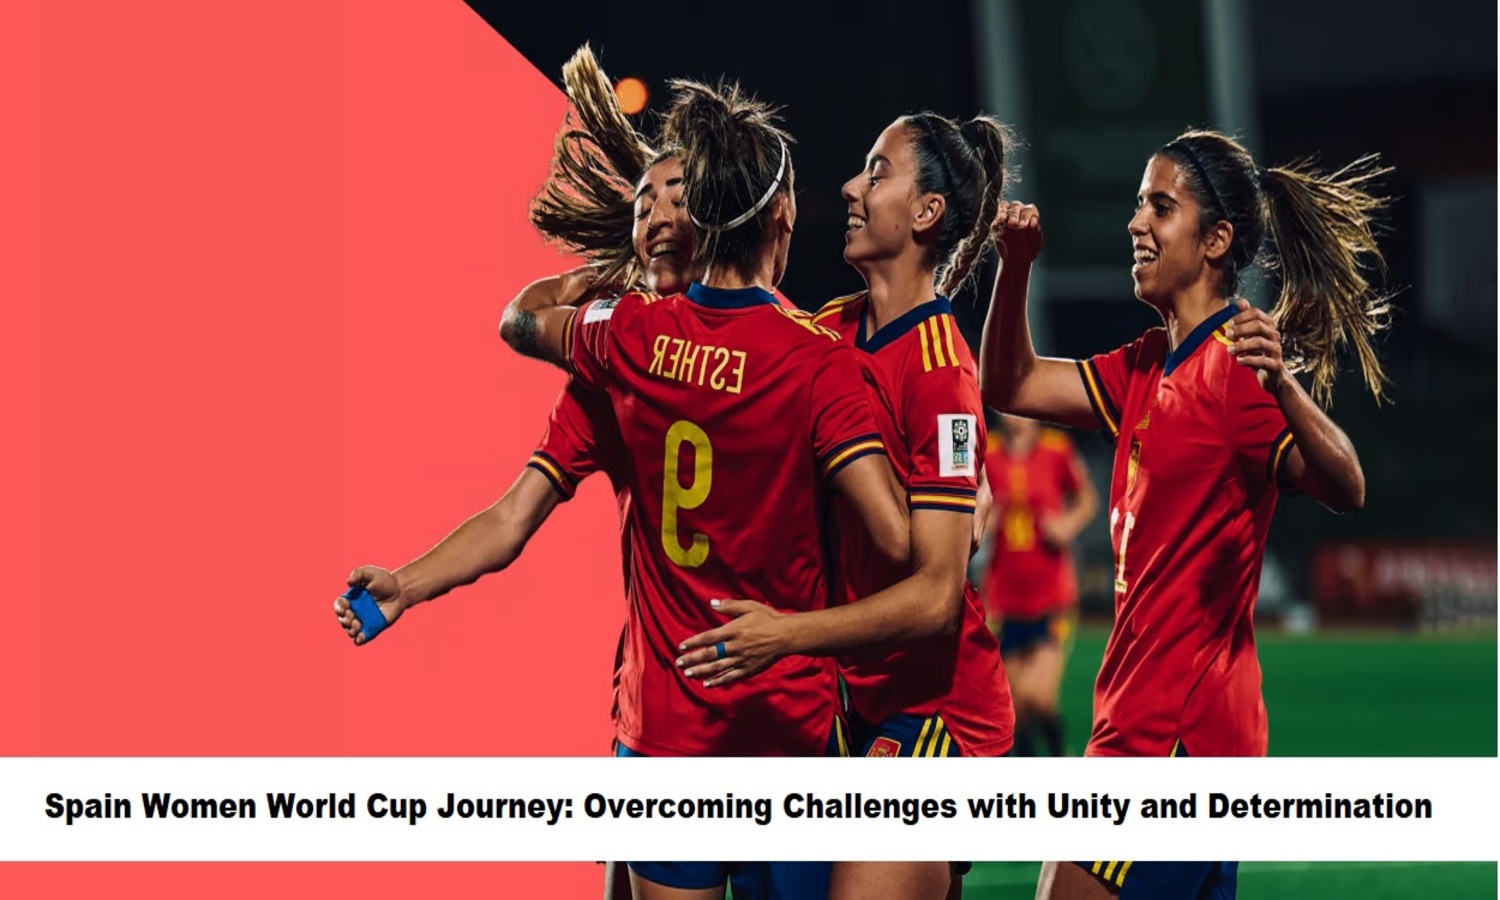 Spain Women World Cup Journey Overcoming Challenges with Unity and Determination